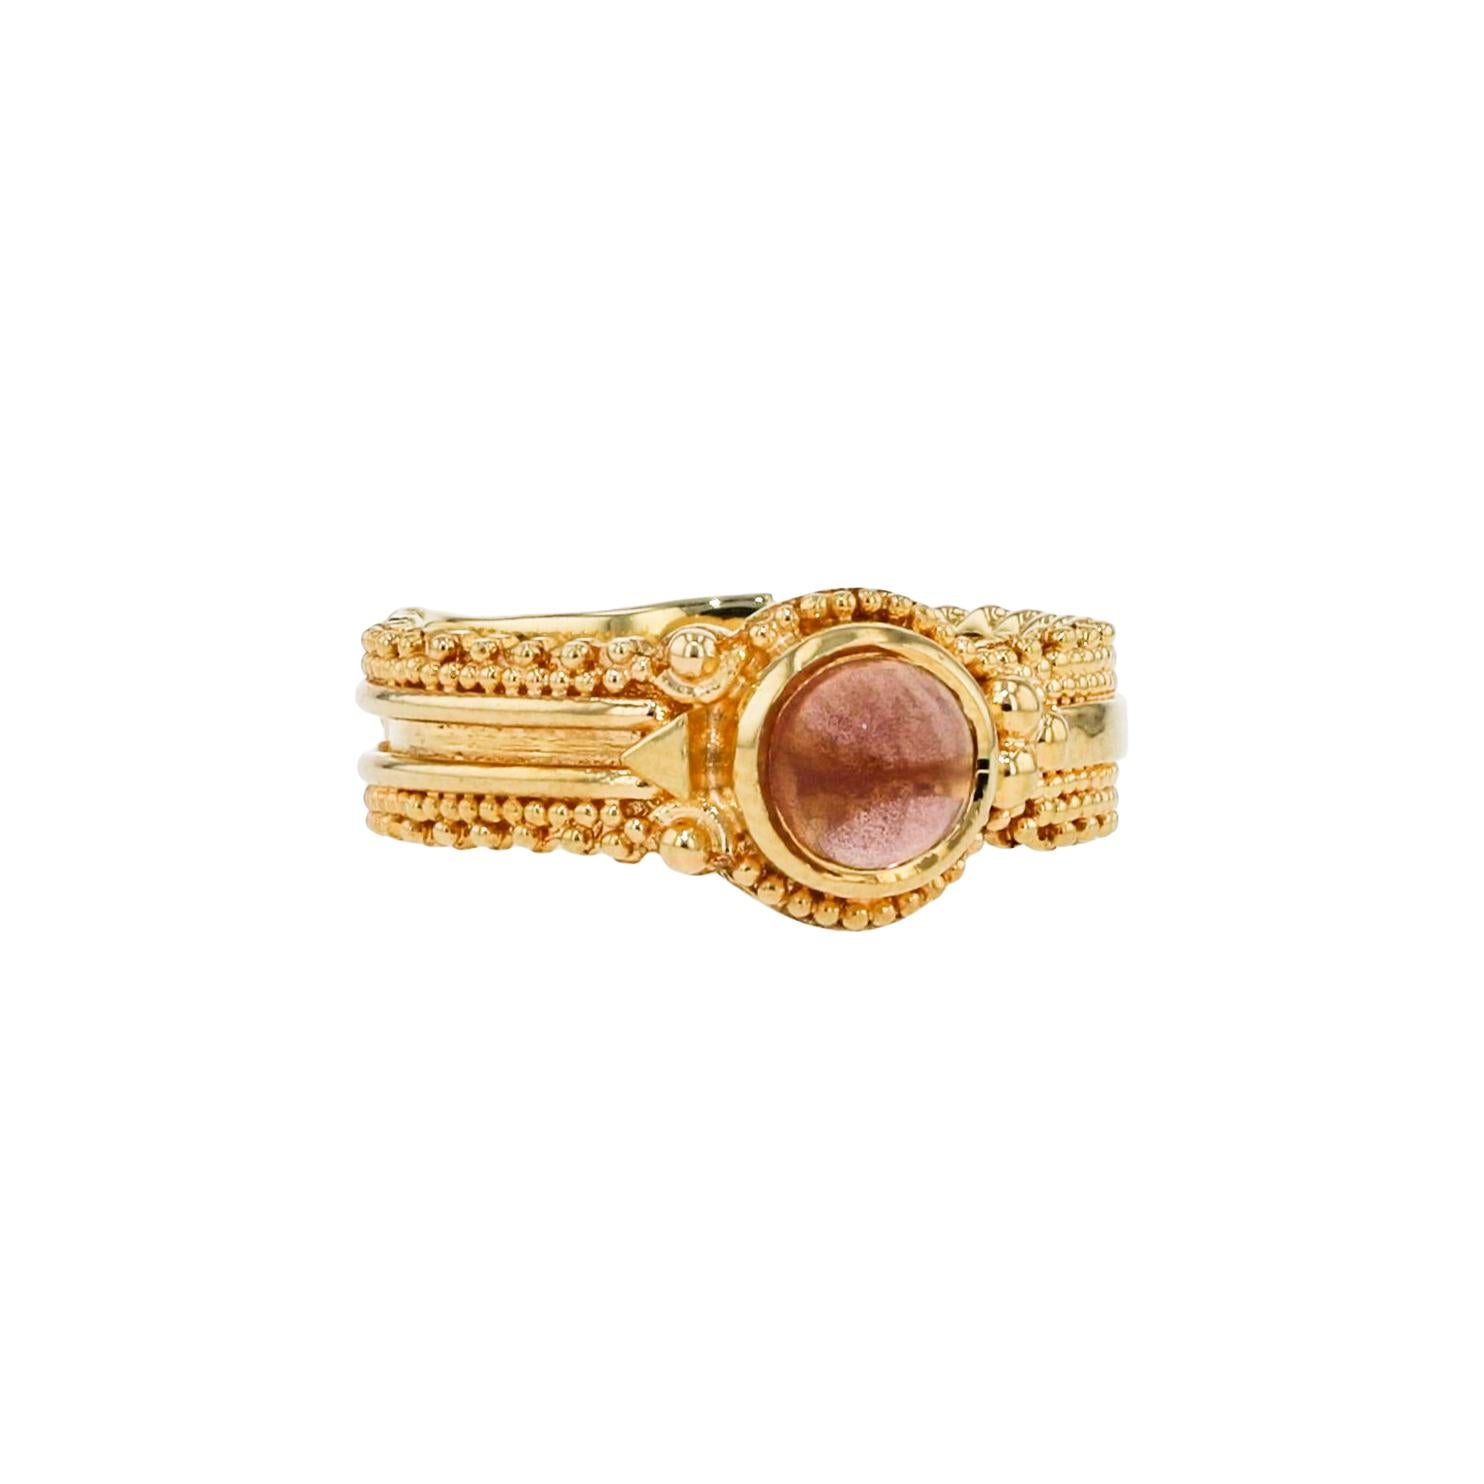 From the Kent Raible one of a kind collection we present this great little treasure! Rarely do you see a one of a kind ring from Kent in a small scale and at such an affordable price! The details change all around the band, and the Sunstone from